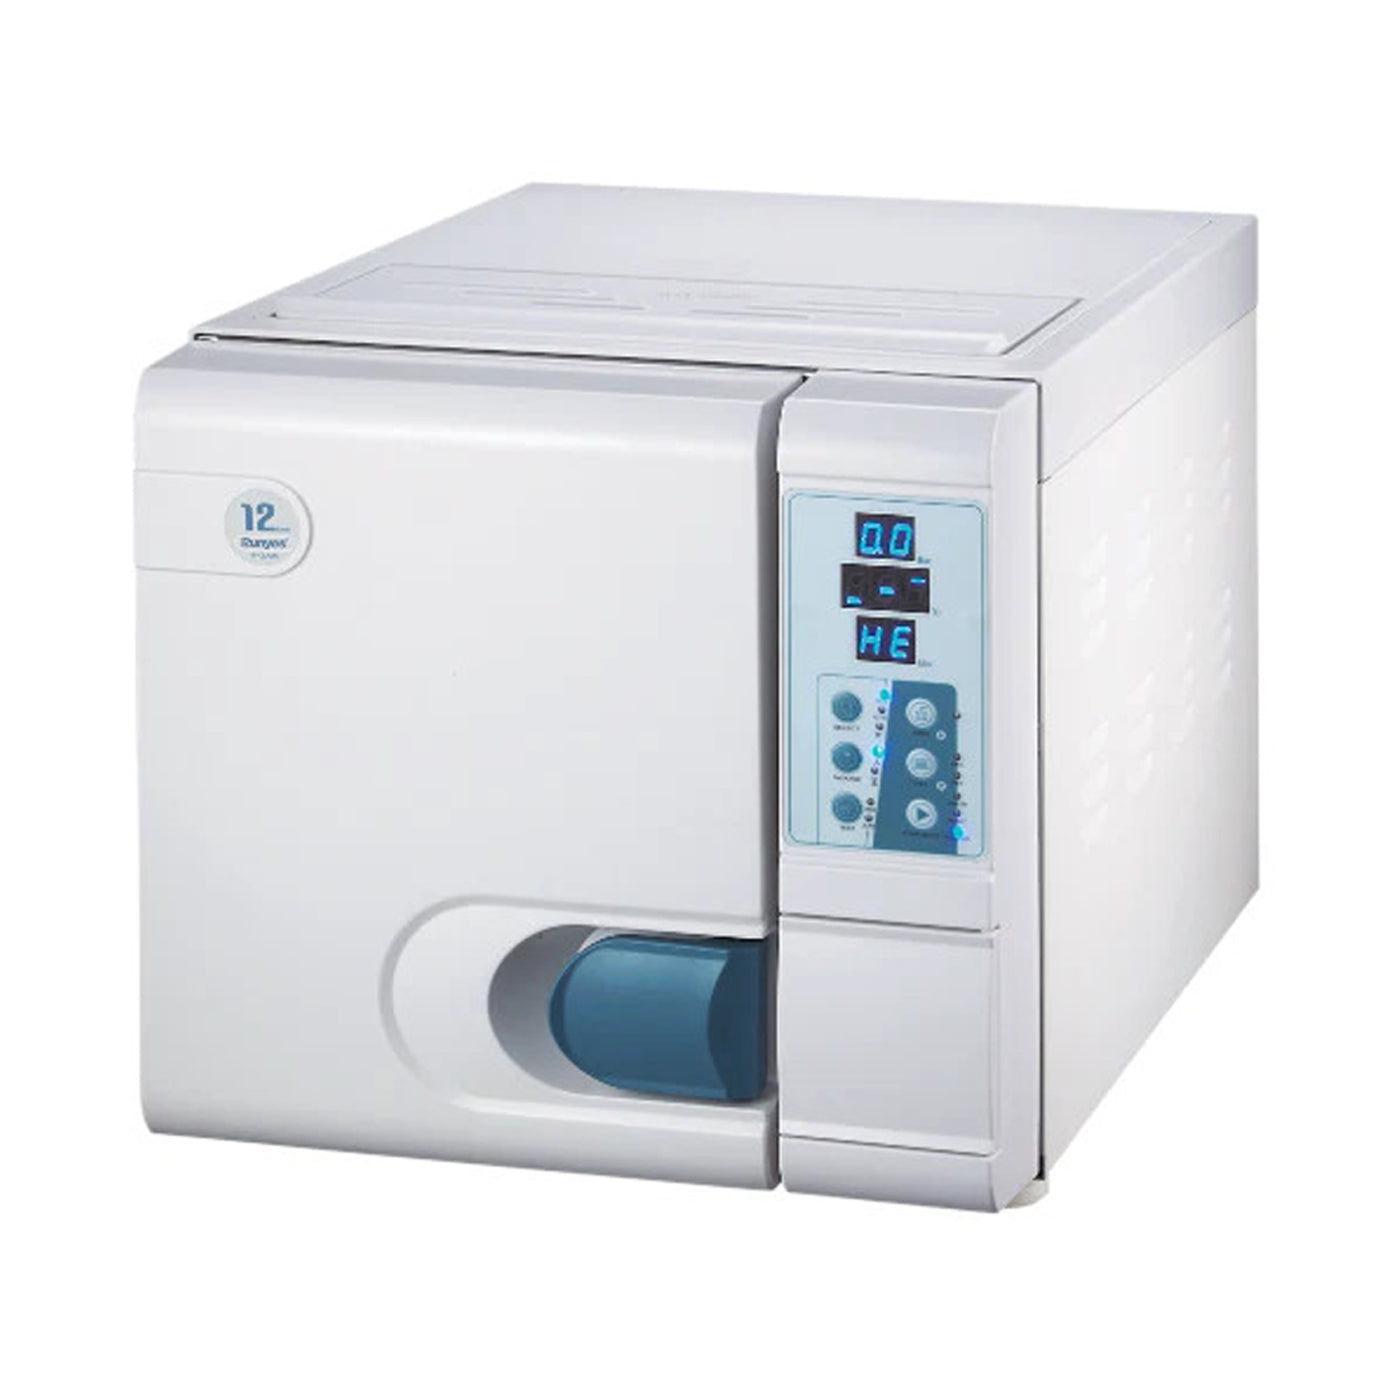 Runyes 12L B & S Class Autoclave